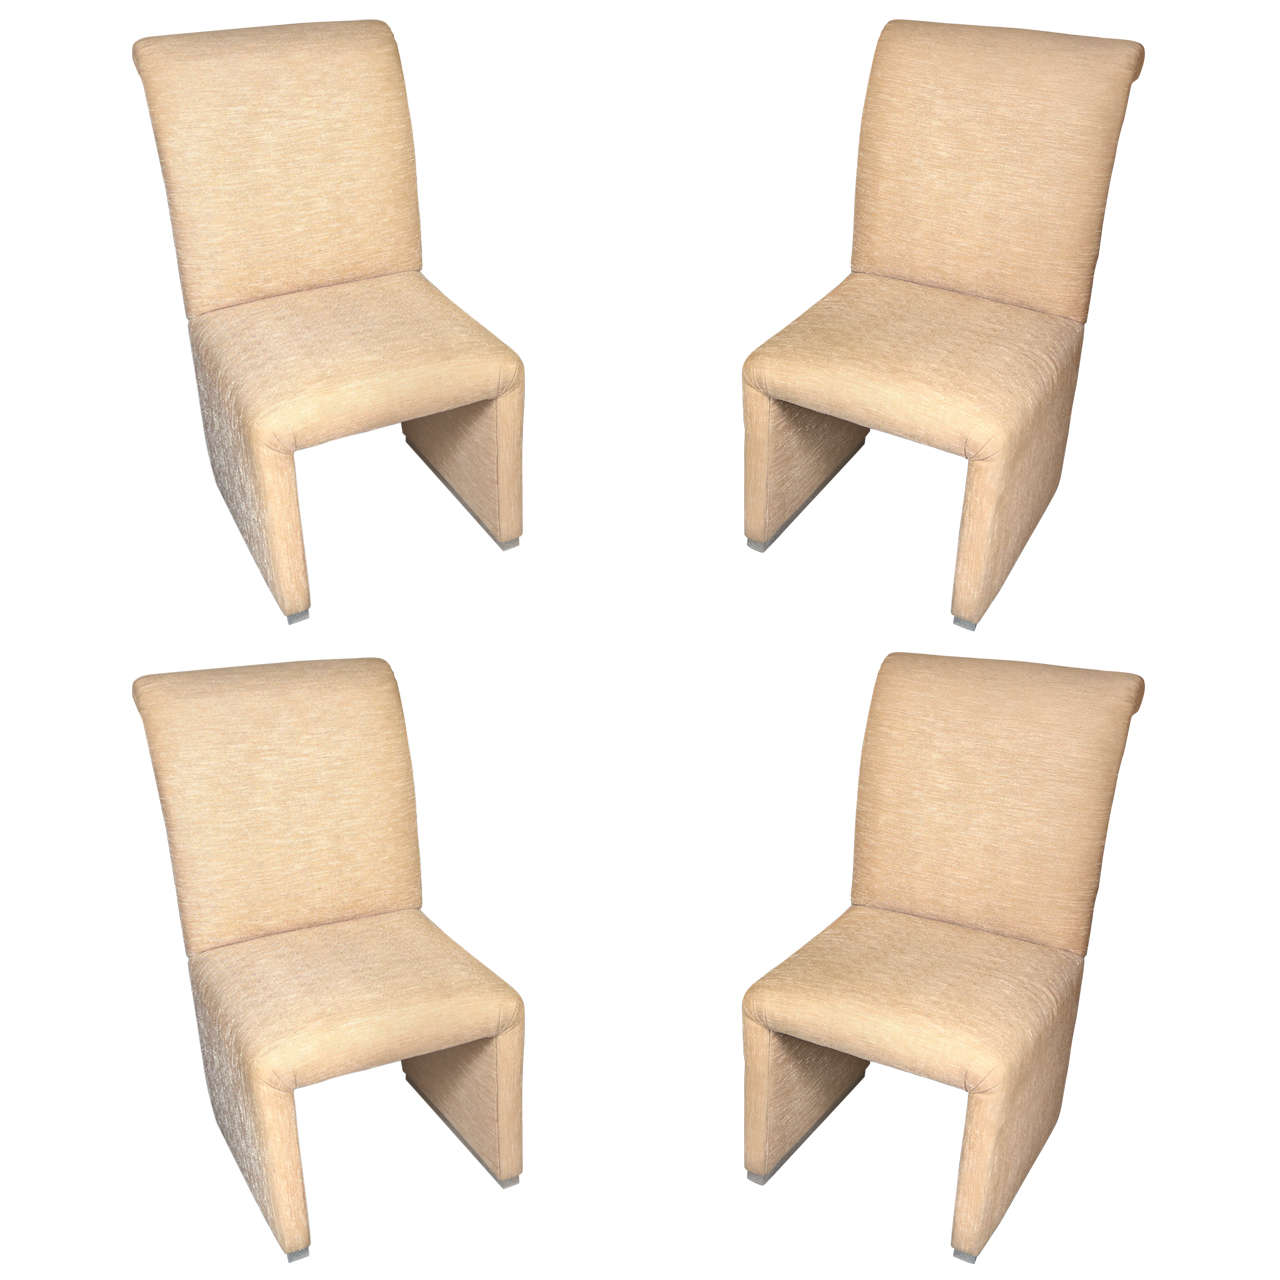 Set of Four Chairs by Steve Chase